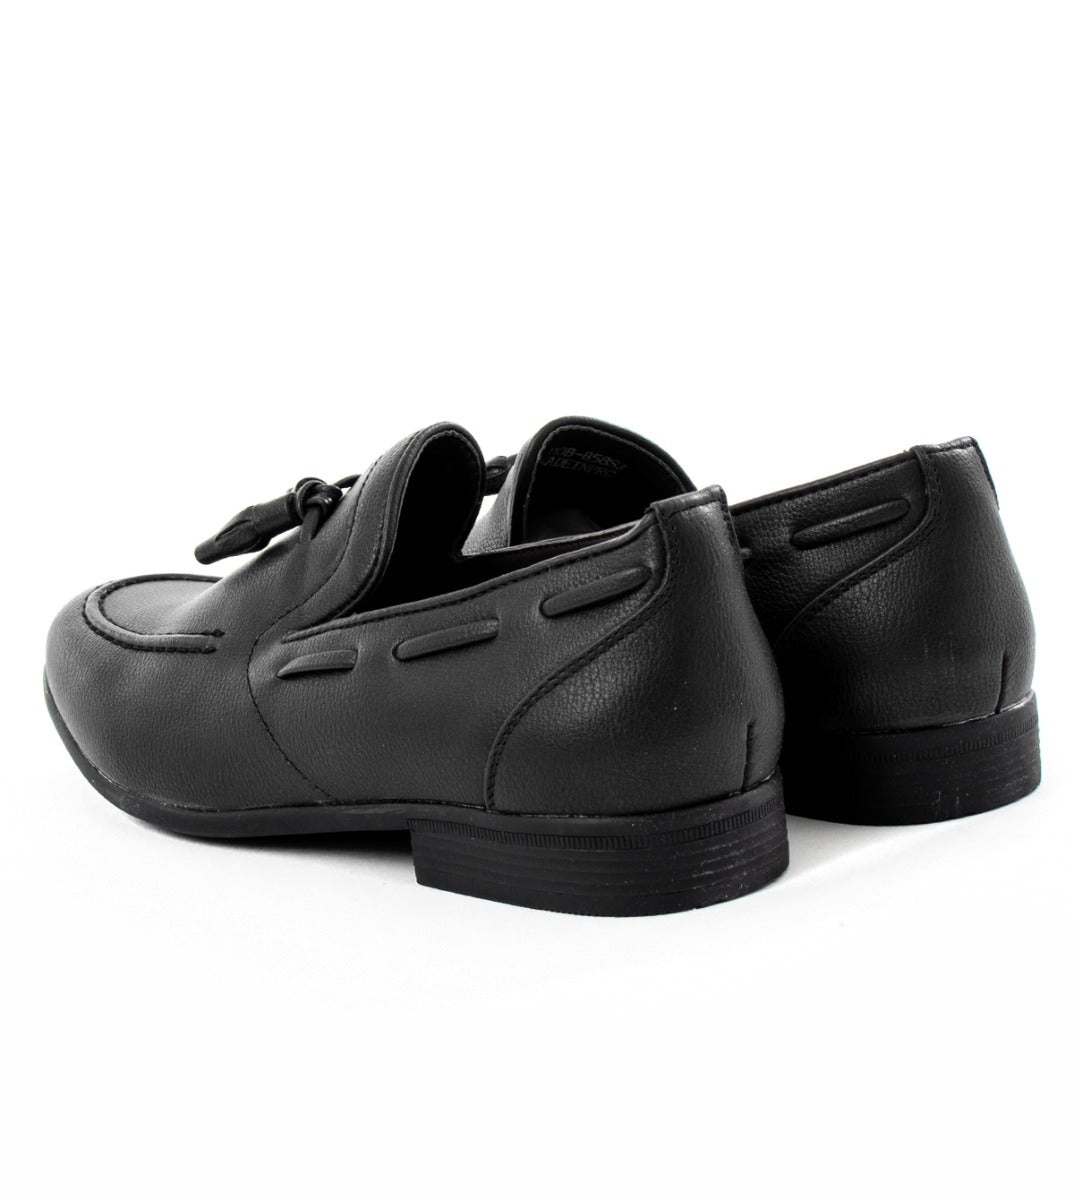 Men's Shoes Moccasins With Tassels Faux Leather Black College Elegant Sports GIOSAL-S1124A